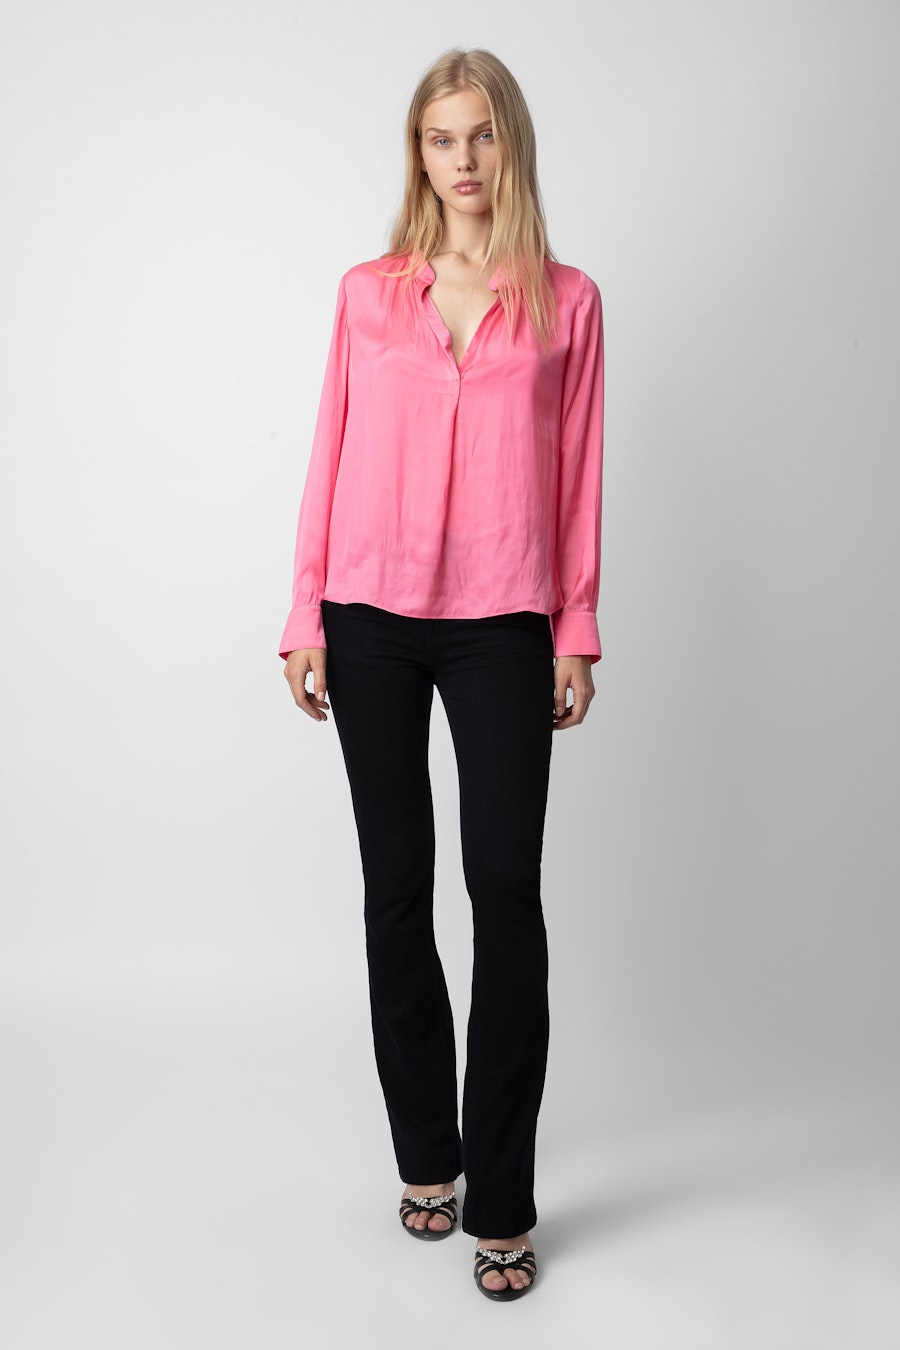 ZADIG&VOLTAIRE Tink Satin Blouse